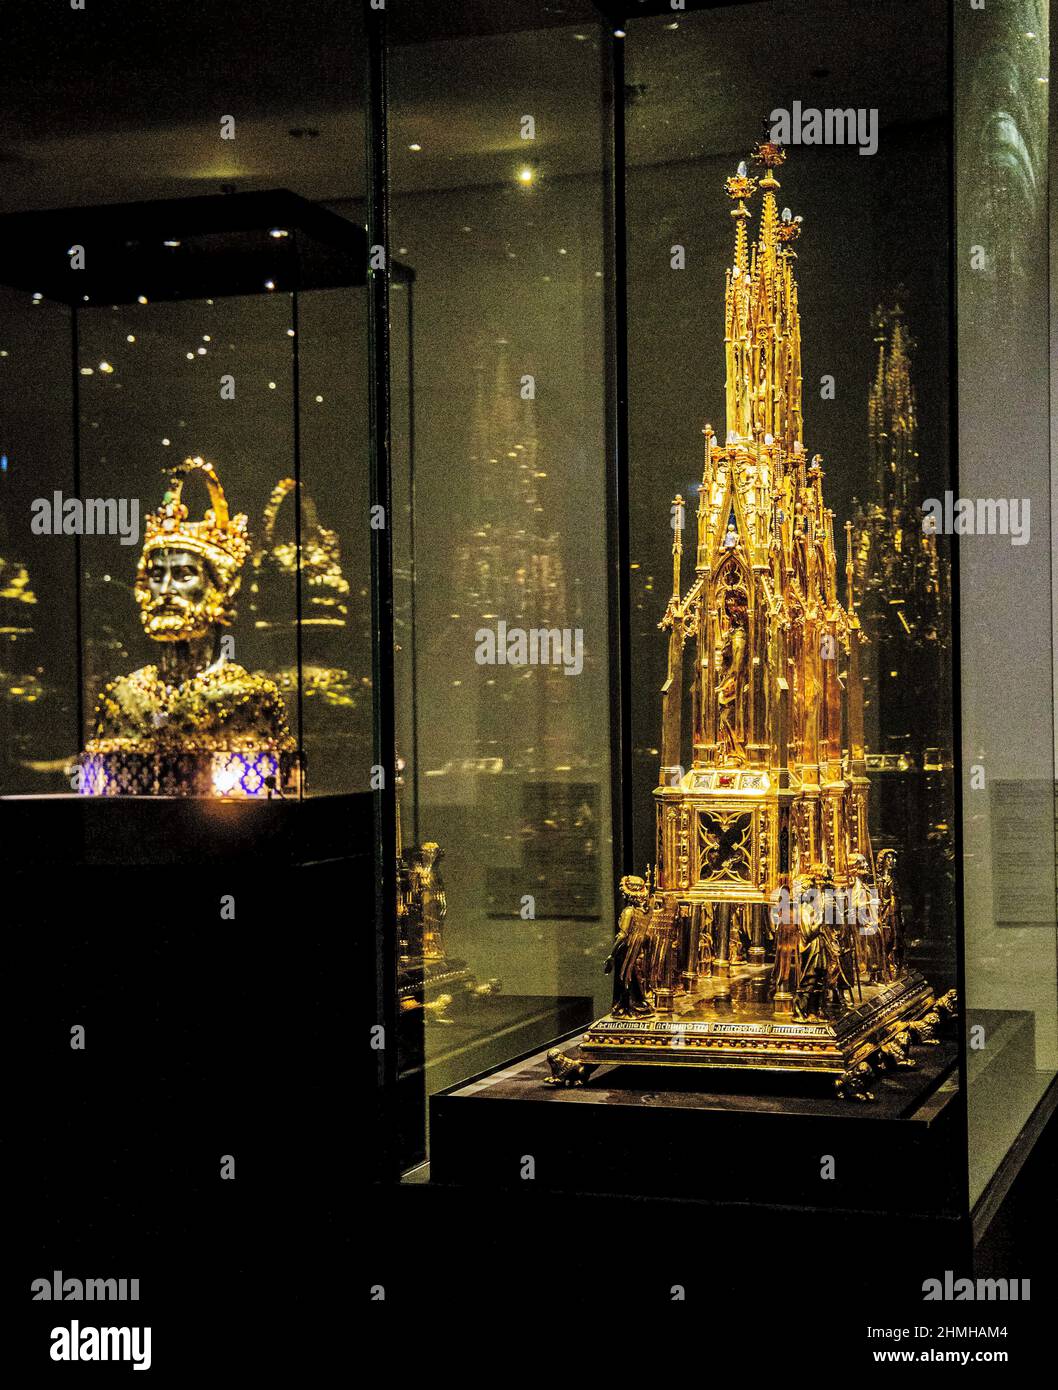 Golden reliquary and golden bust of Emperor Charlemagne (Charleston bust) in the cathedral treasury, Aachen, North Rhine-Westphalia, Germany Stock Photo